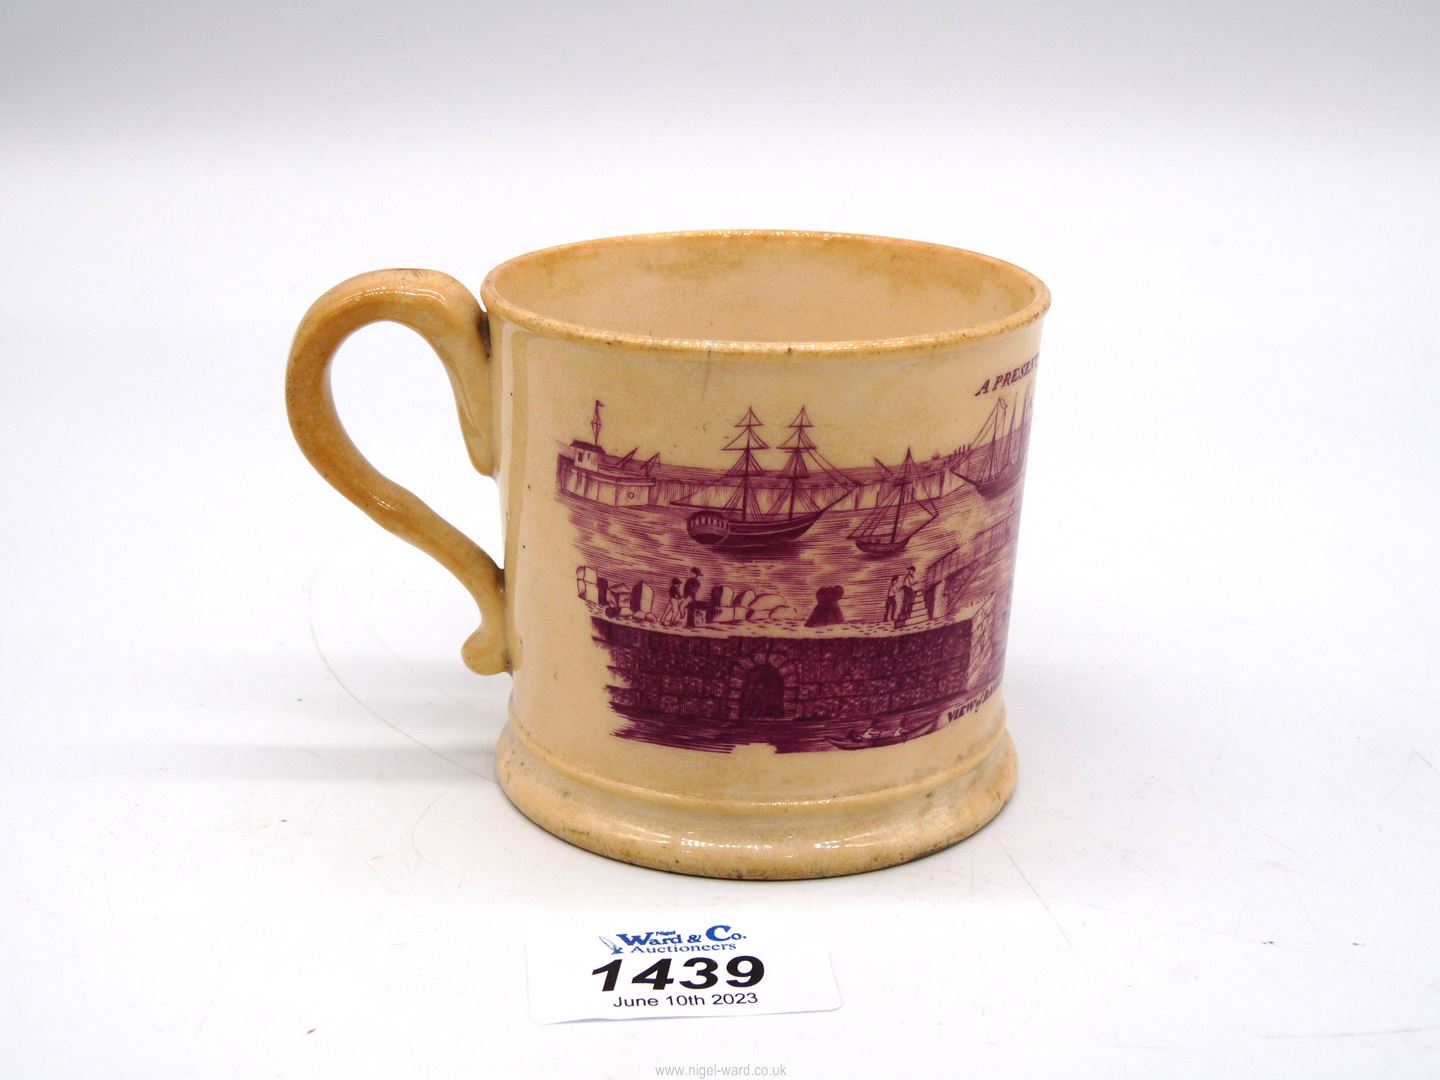 Ramsgate interest: a very rare William IV or early Victorian small pottery souvenir mug, - Image 2 of 4